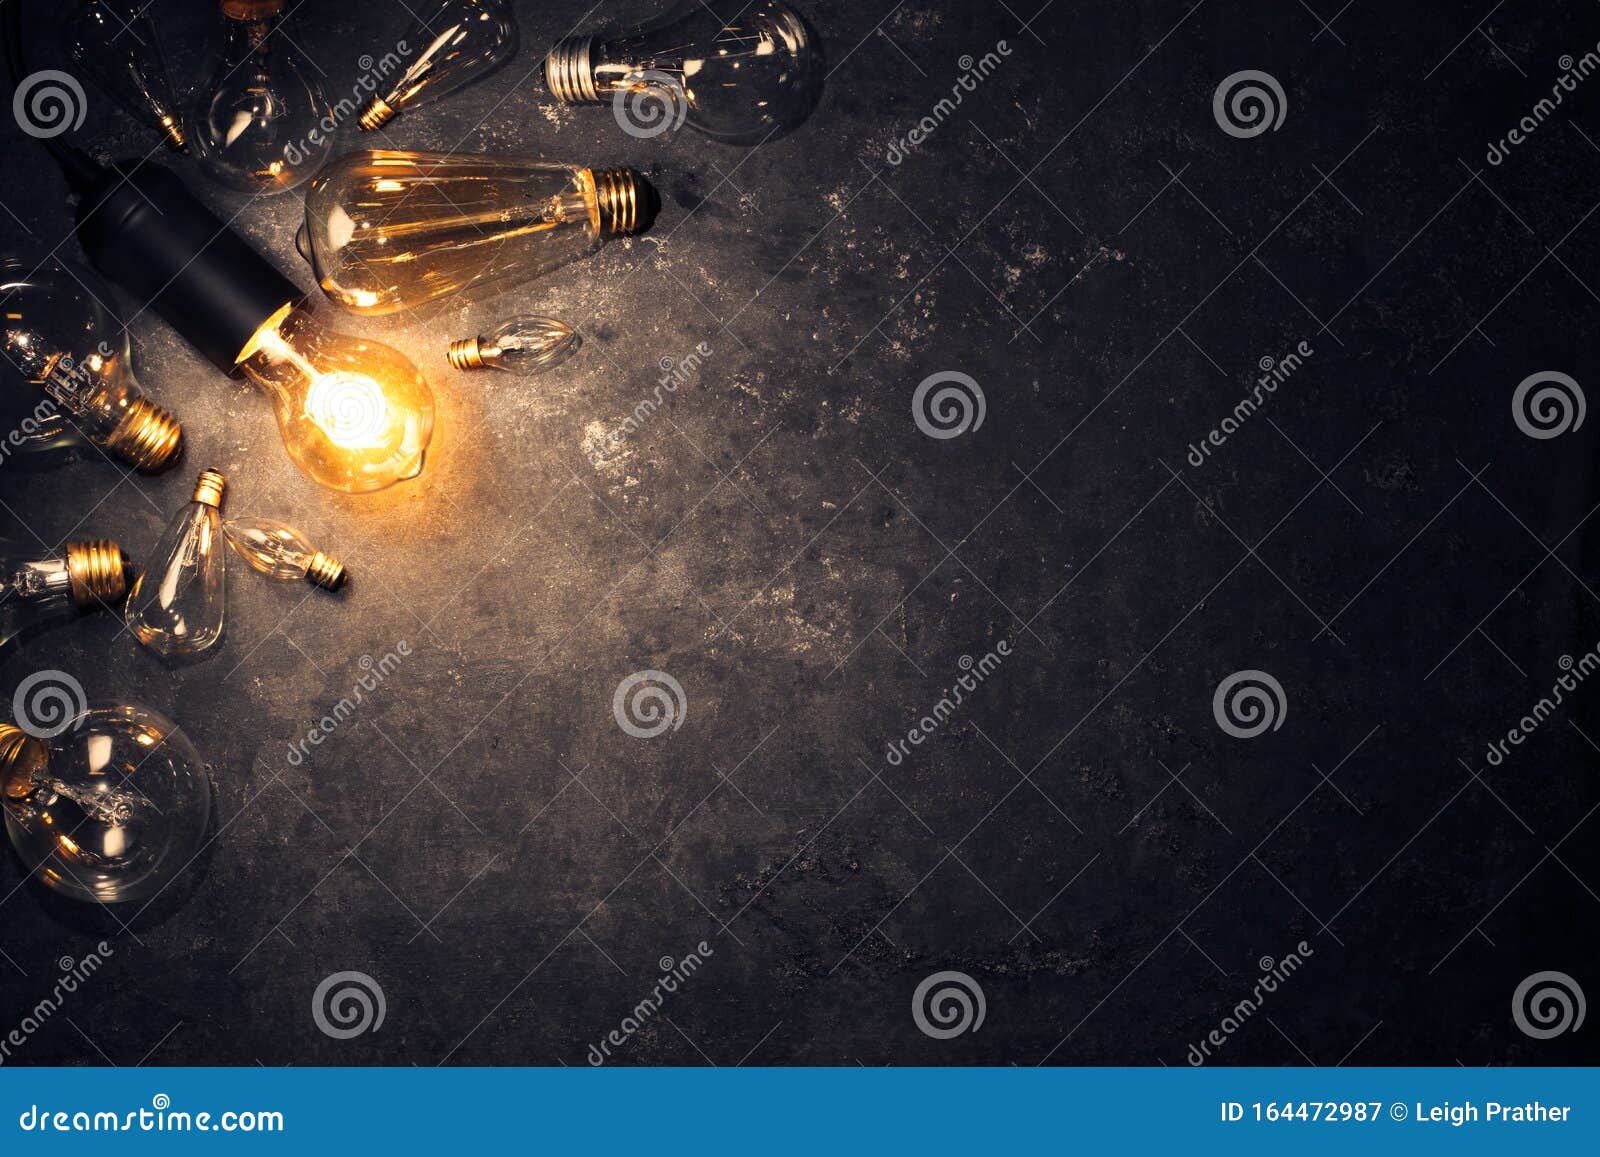 vintage old light bulb glowing on rough dark background surrounded by burnt out bulbs. idea, creativity concept